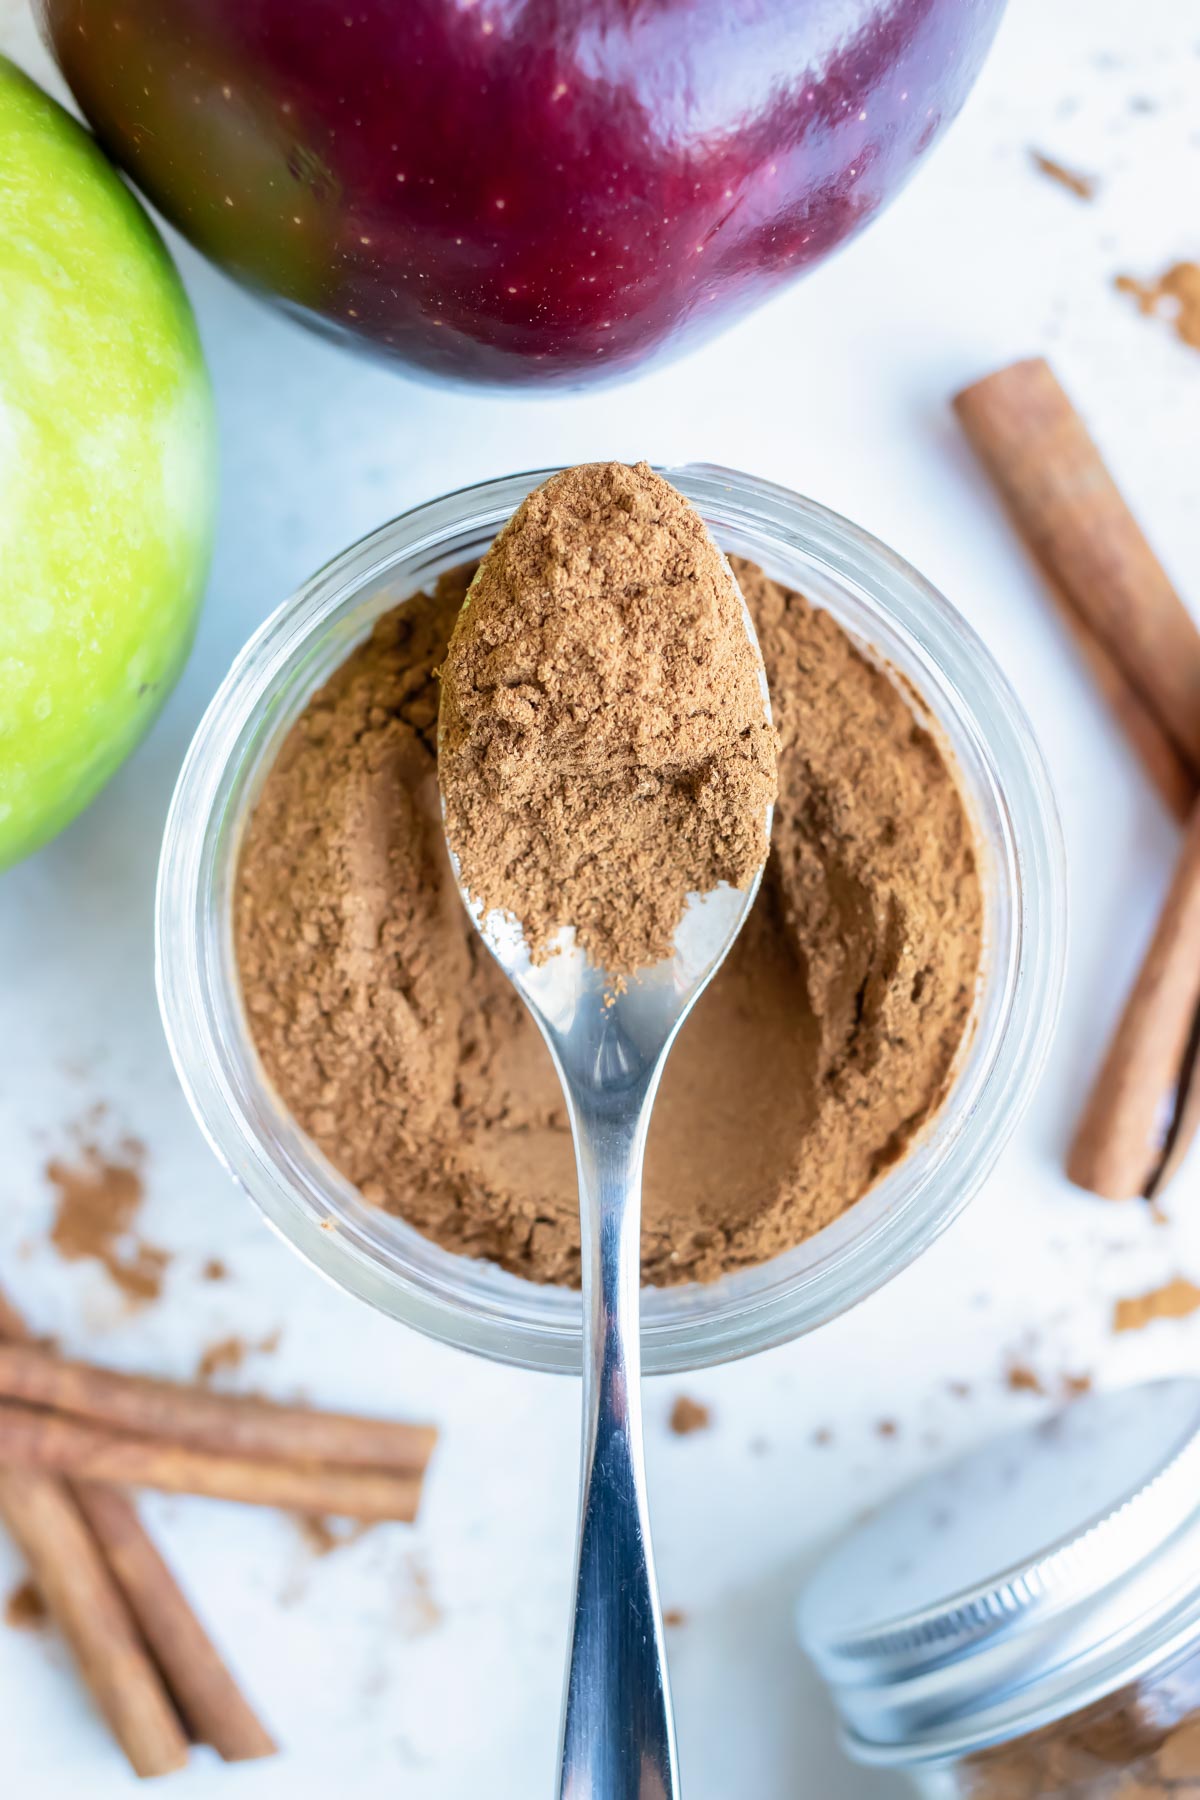 Learn what is in apple pie spice blend with this easy recipe.